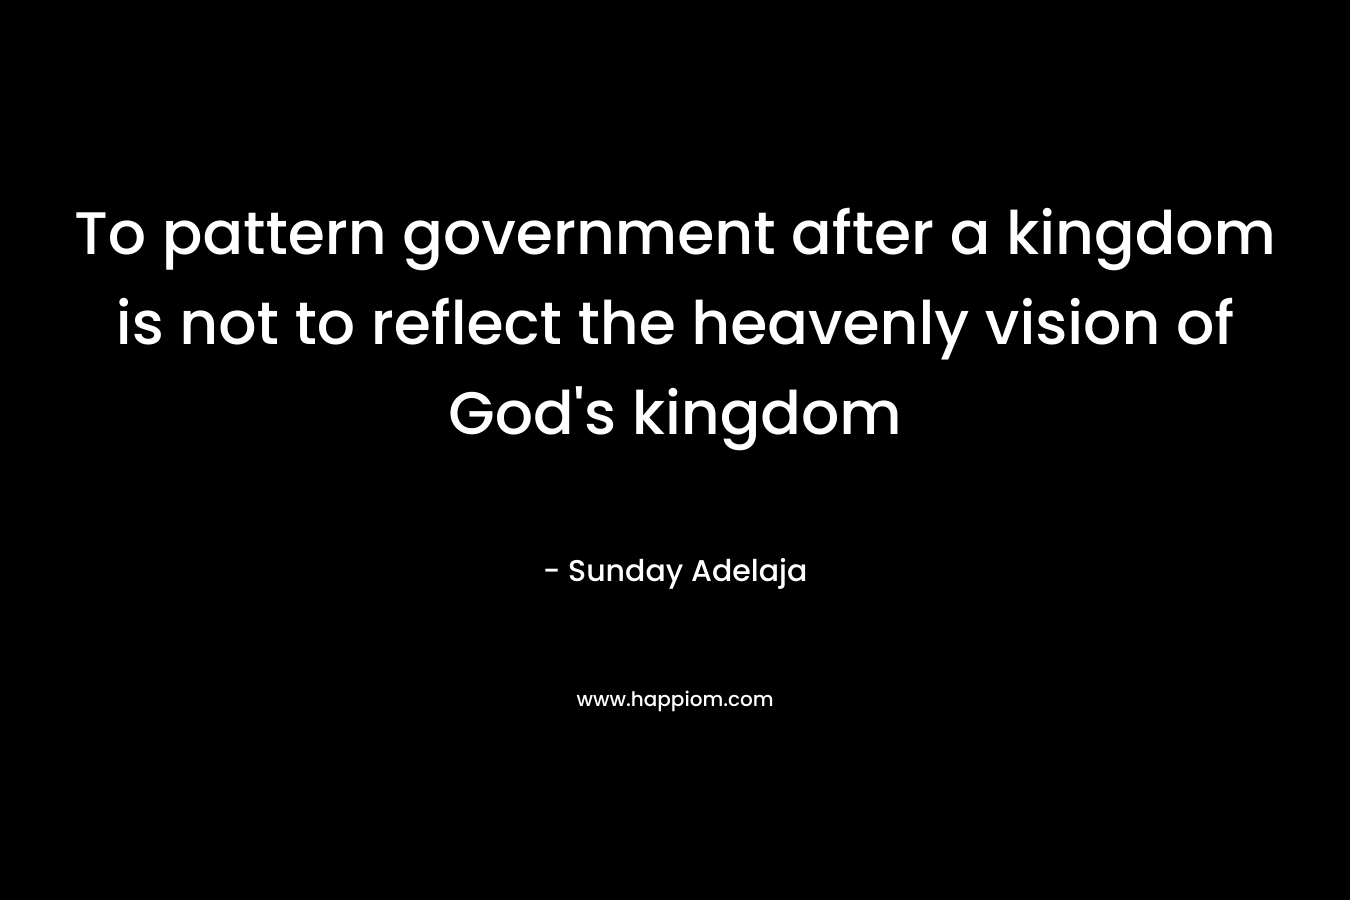 To pattern government after a kingdom is not to reflect the heavenly vision of God's kingdom